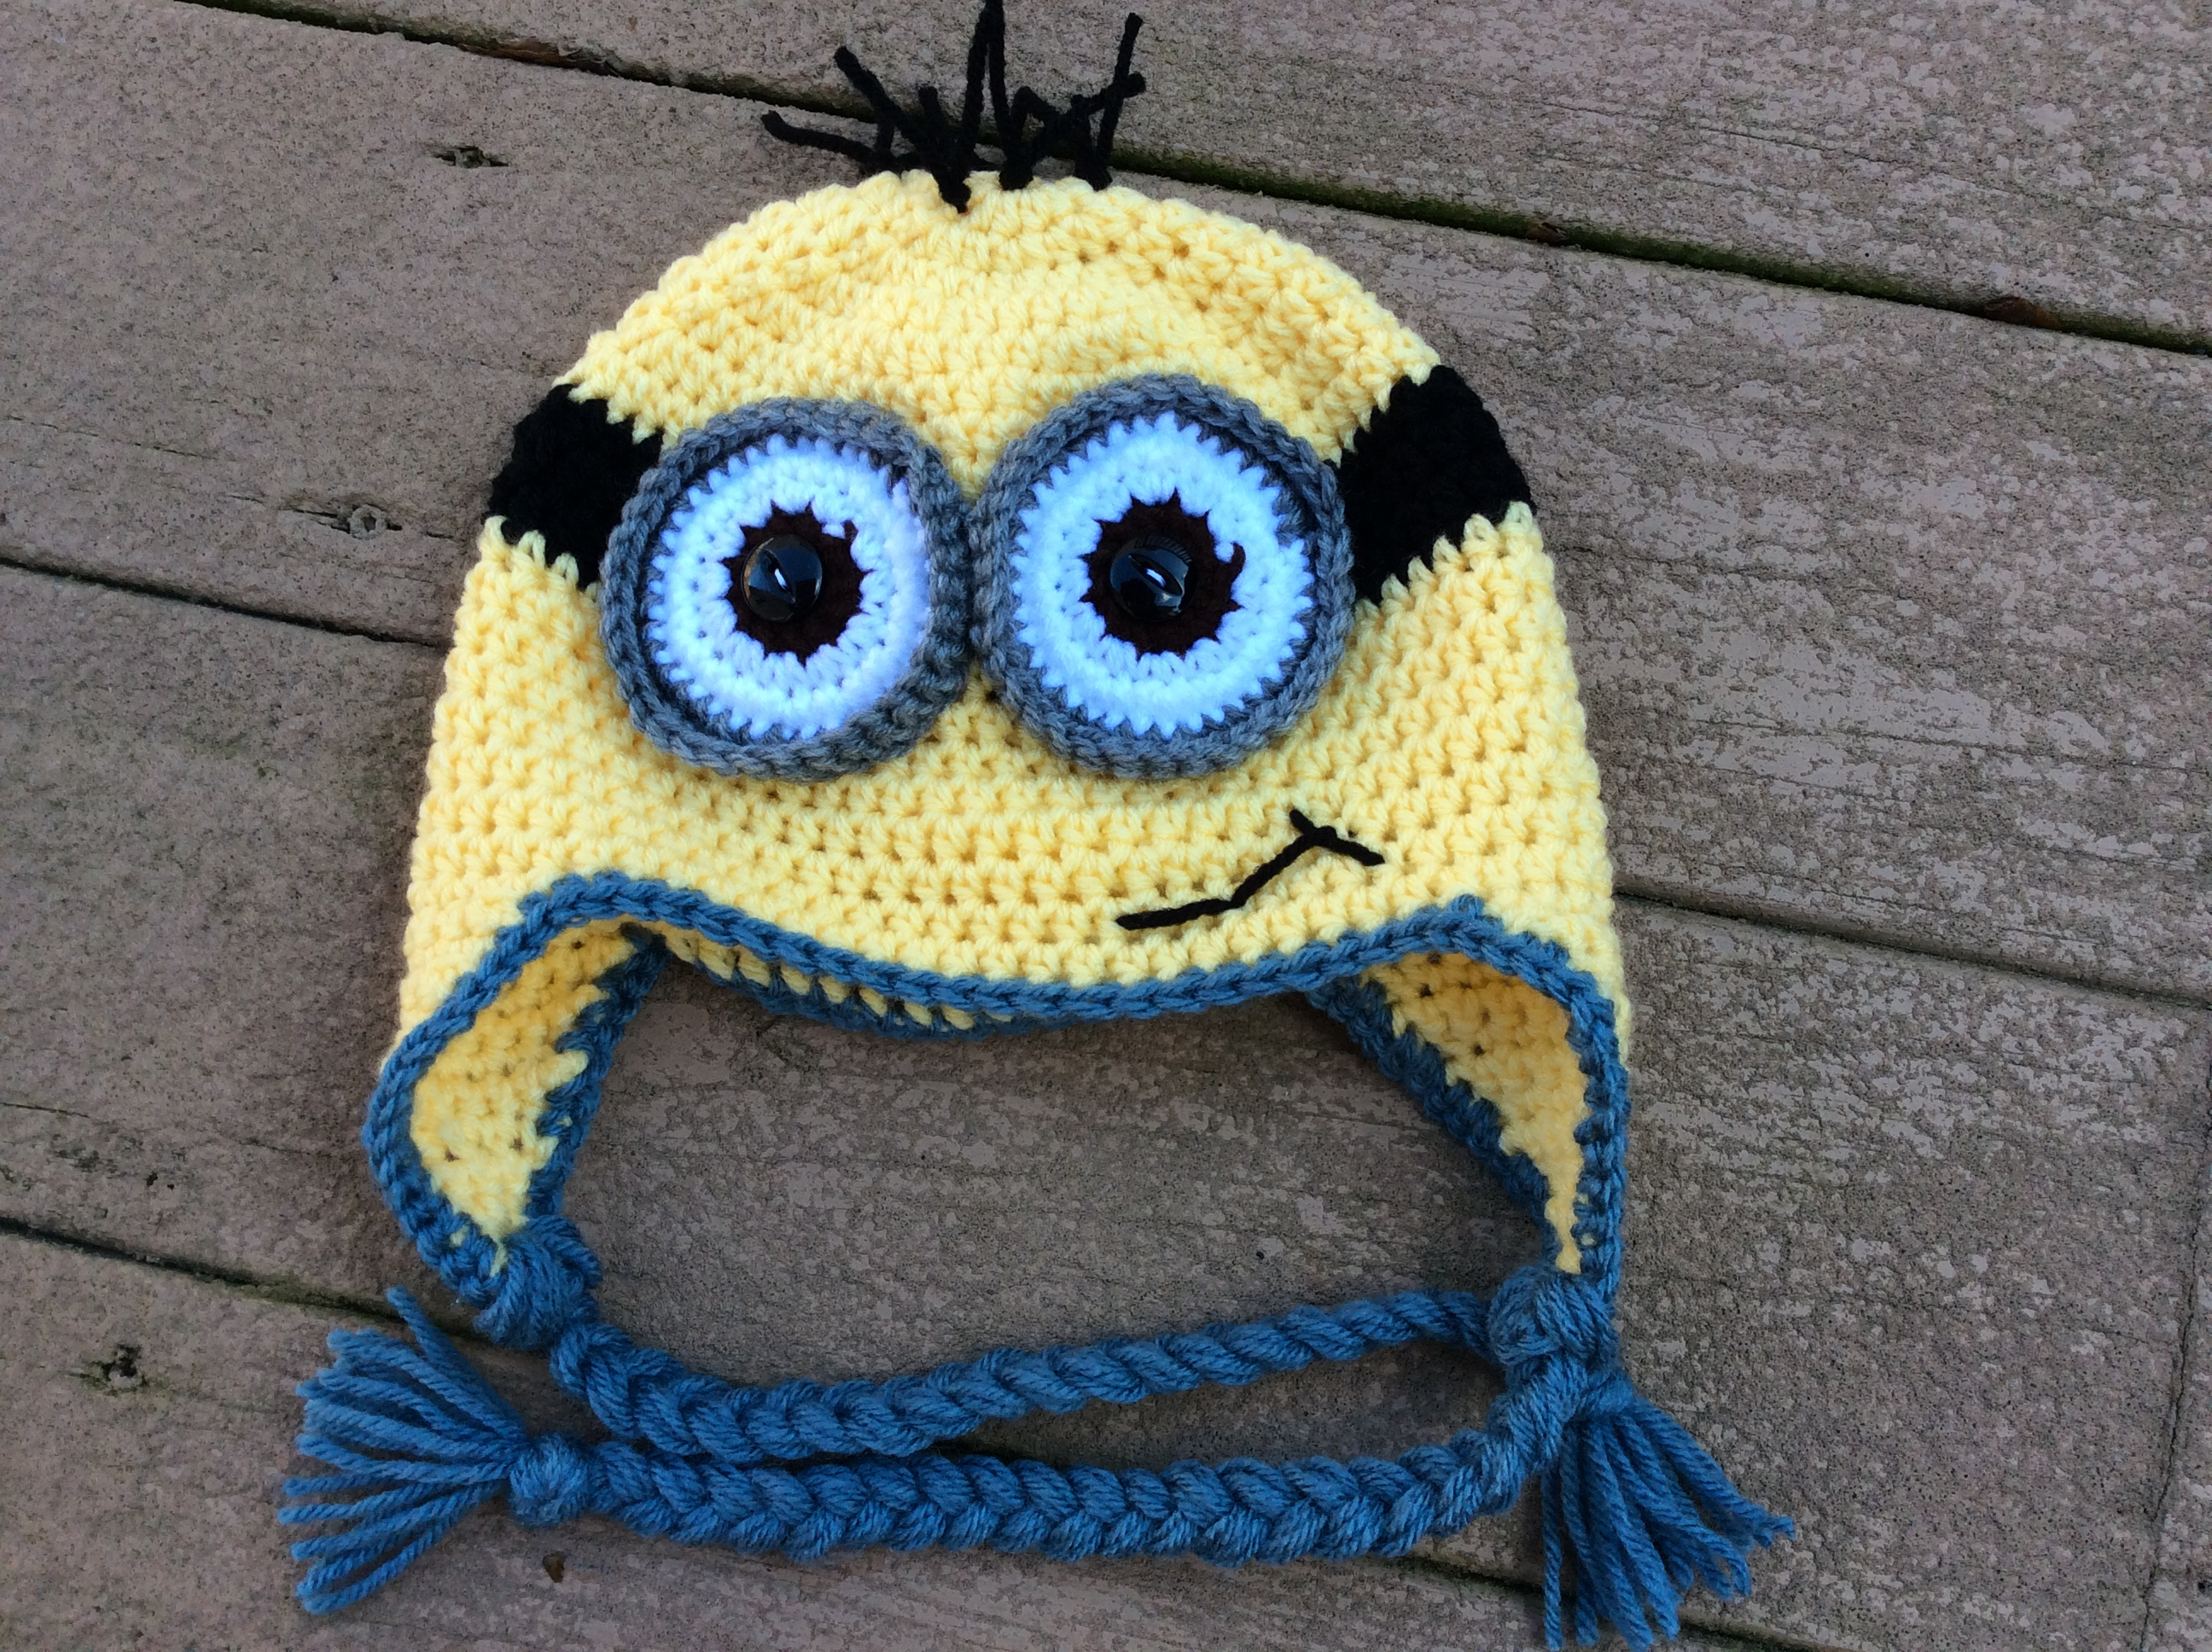 Knitting Patterns For Minion Hats Crochet Minion Hat From Yarnover The Moon